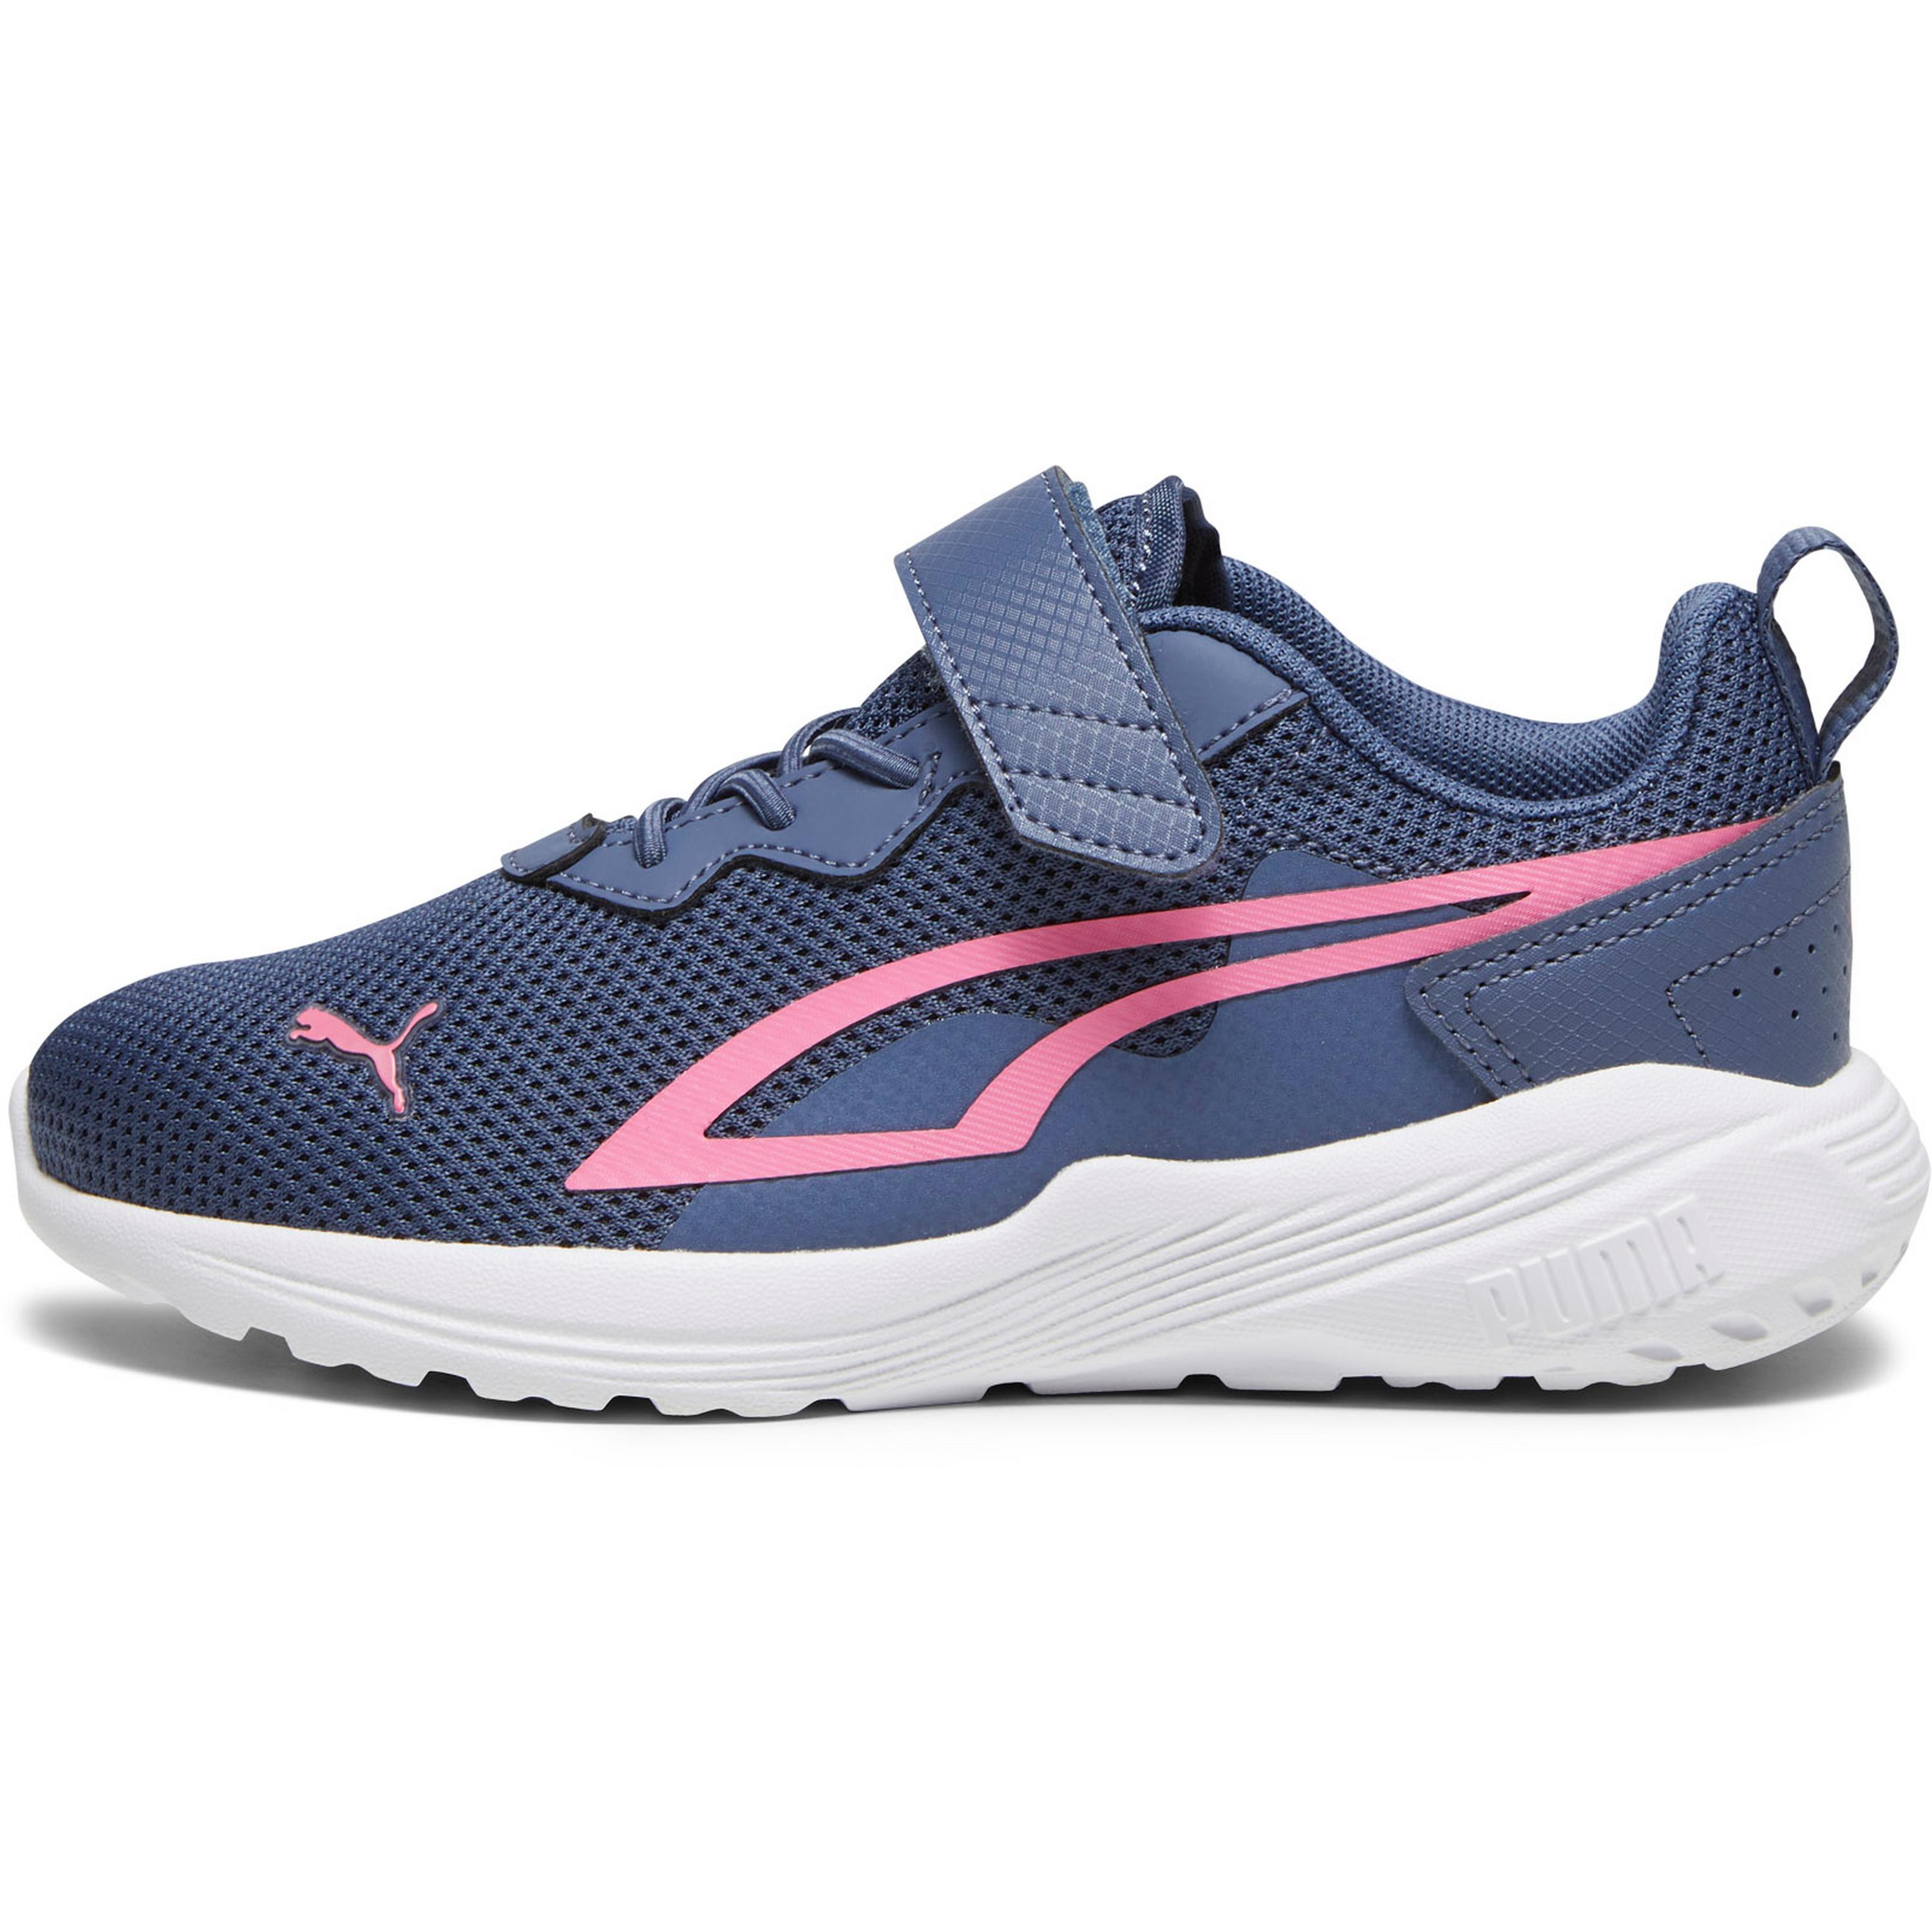 PUMA All-Day Active Fitnessschuhe Kinder